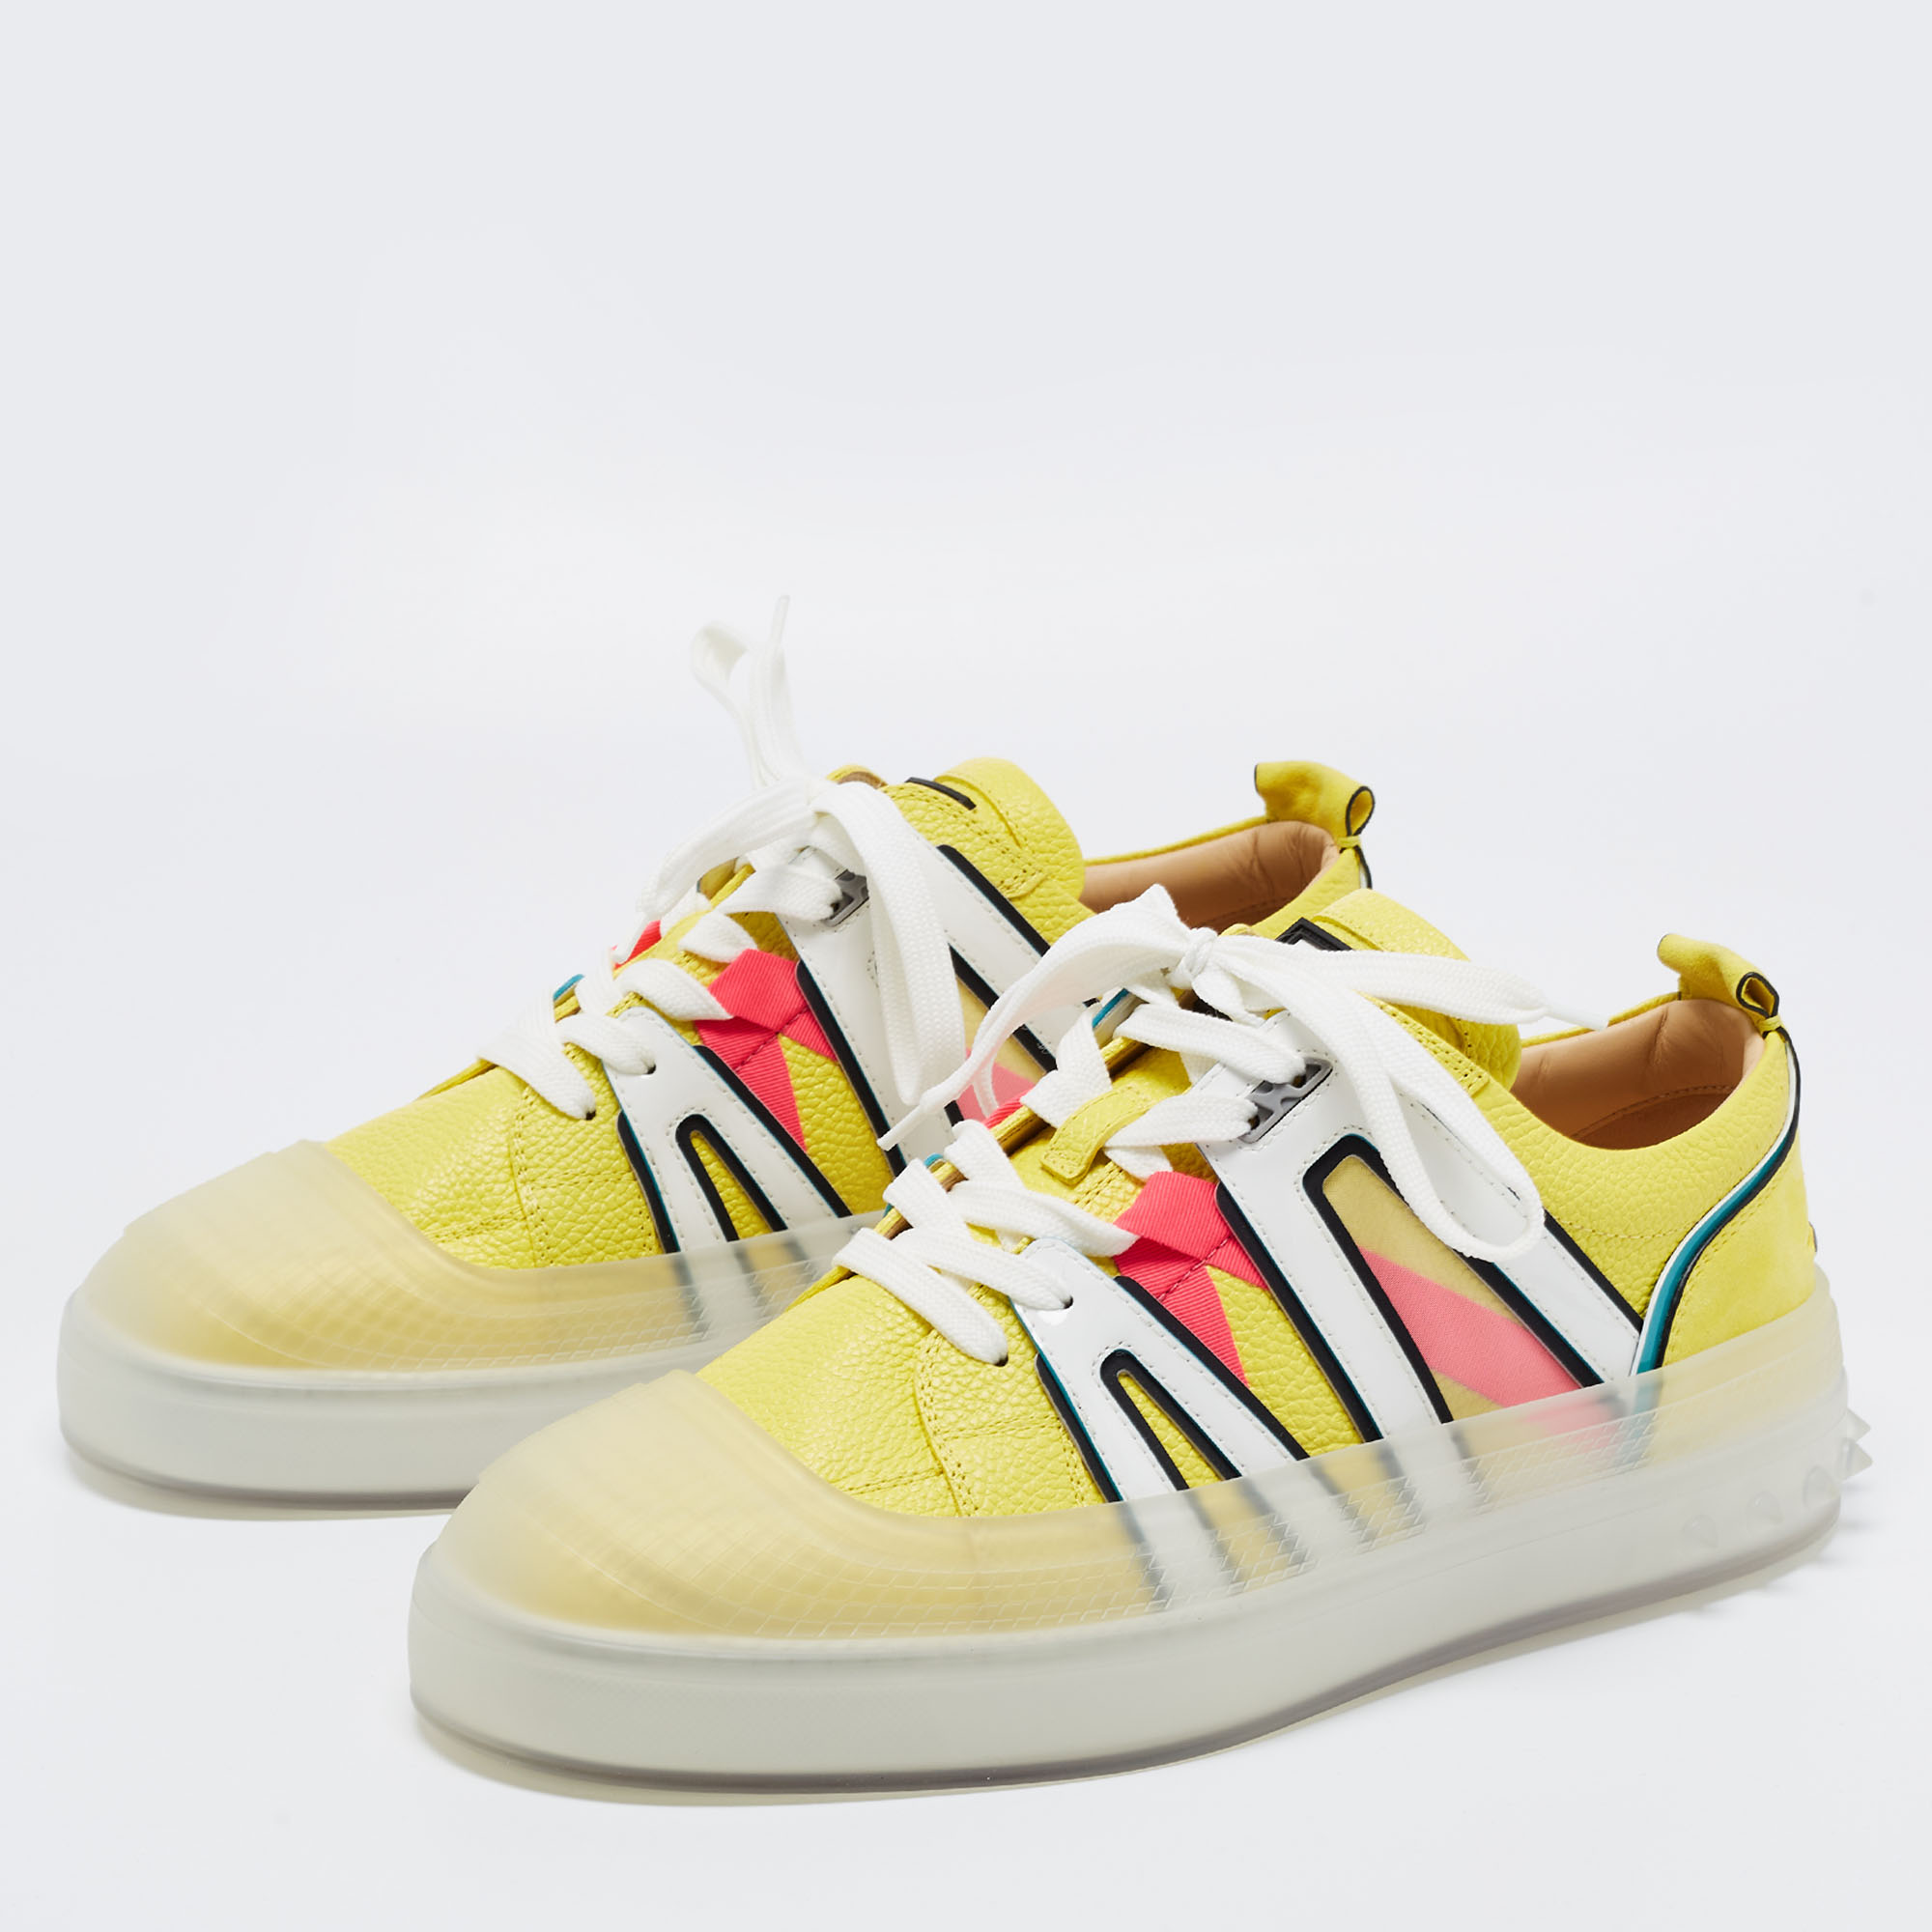 

Christian Louboutin Multicolor Leather and Rubber Vida Viva Sneakers Size, Yellow